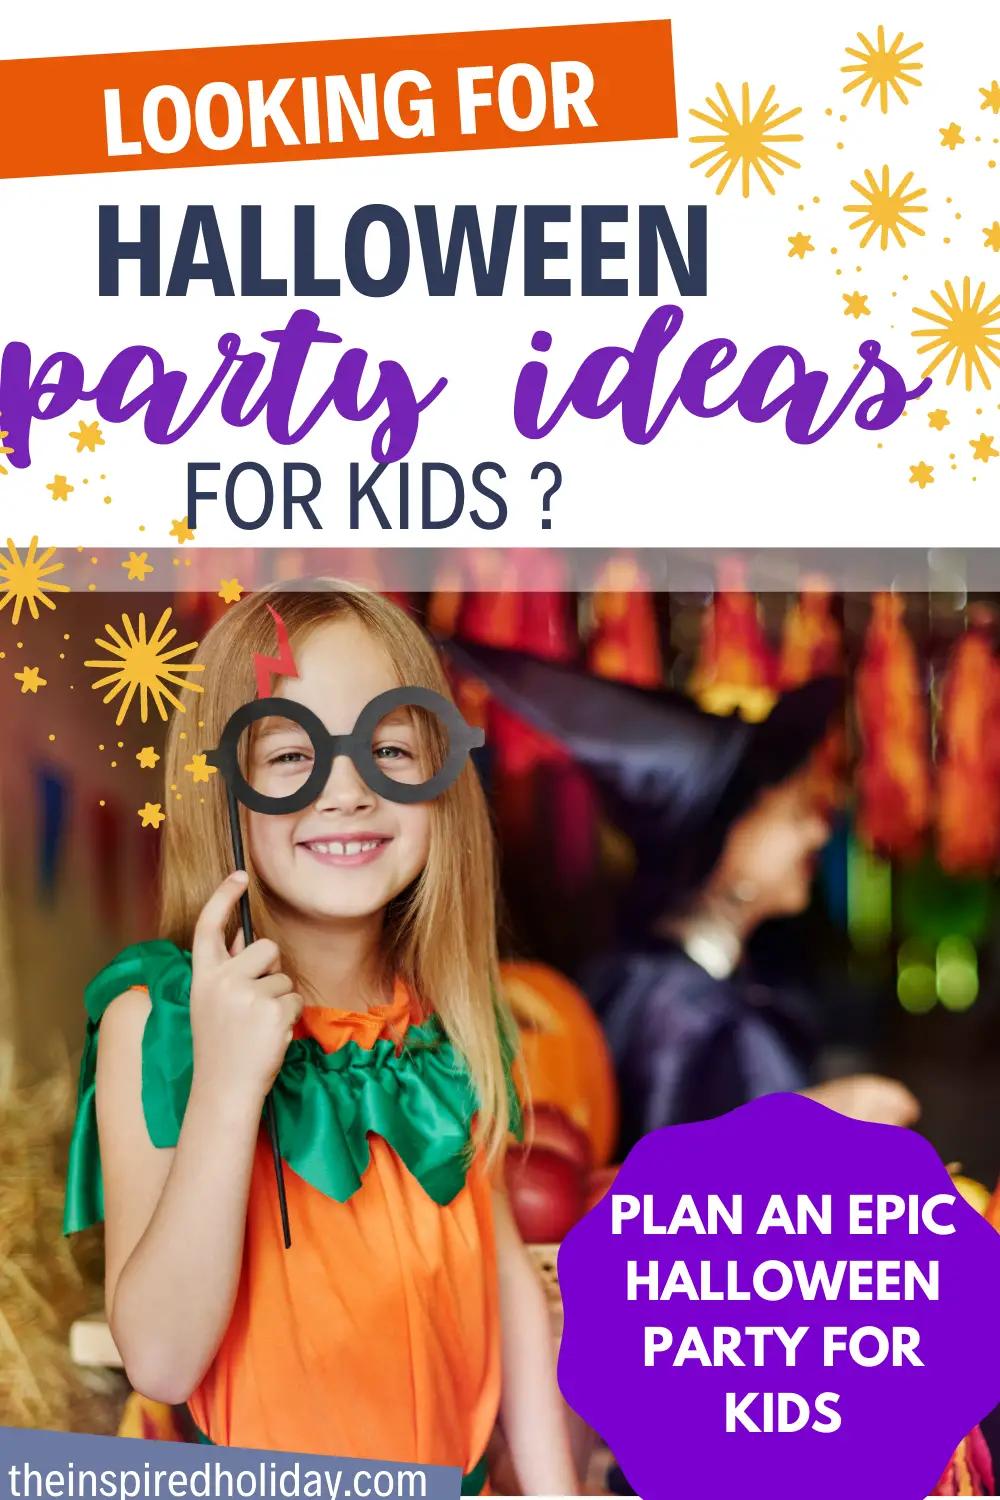 13 Halloween Party Ideas For Kids - The Inspired Holiday